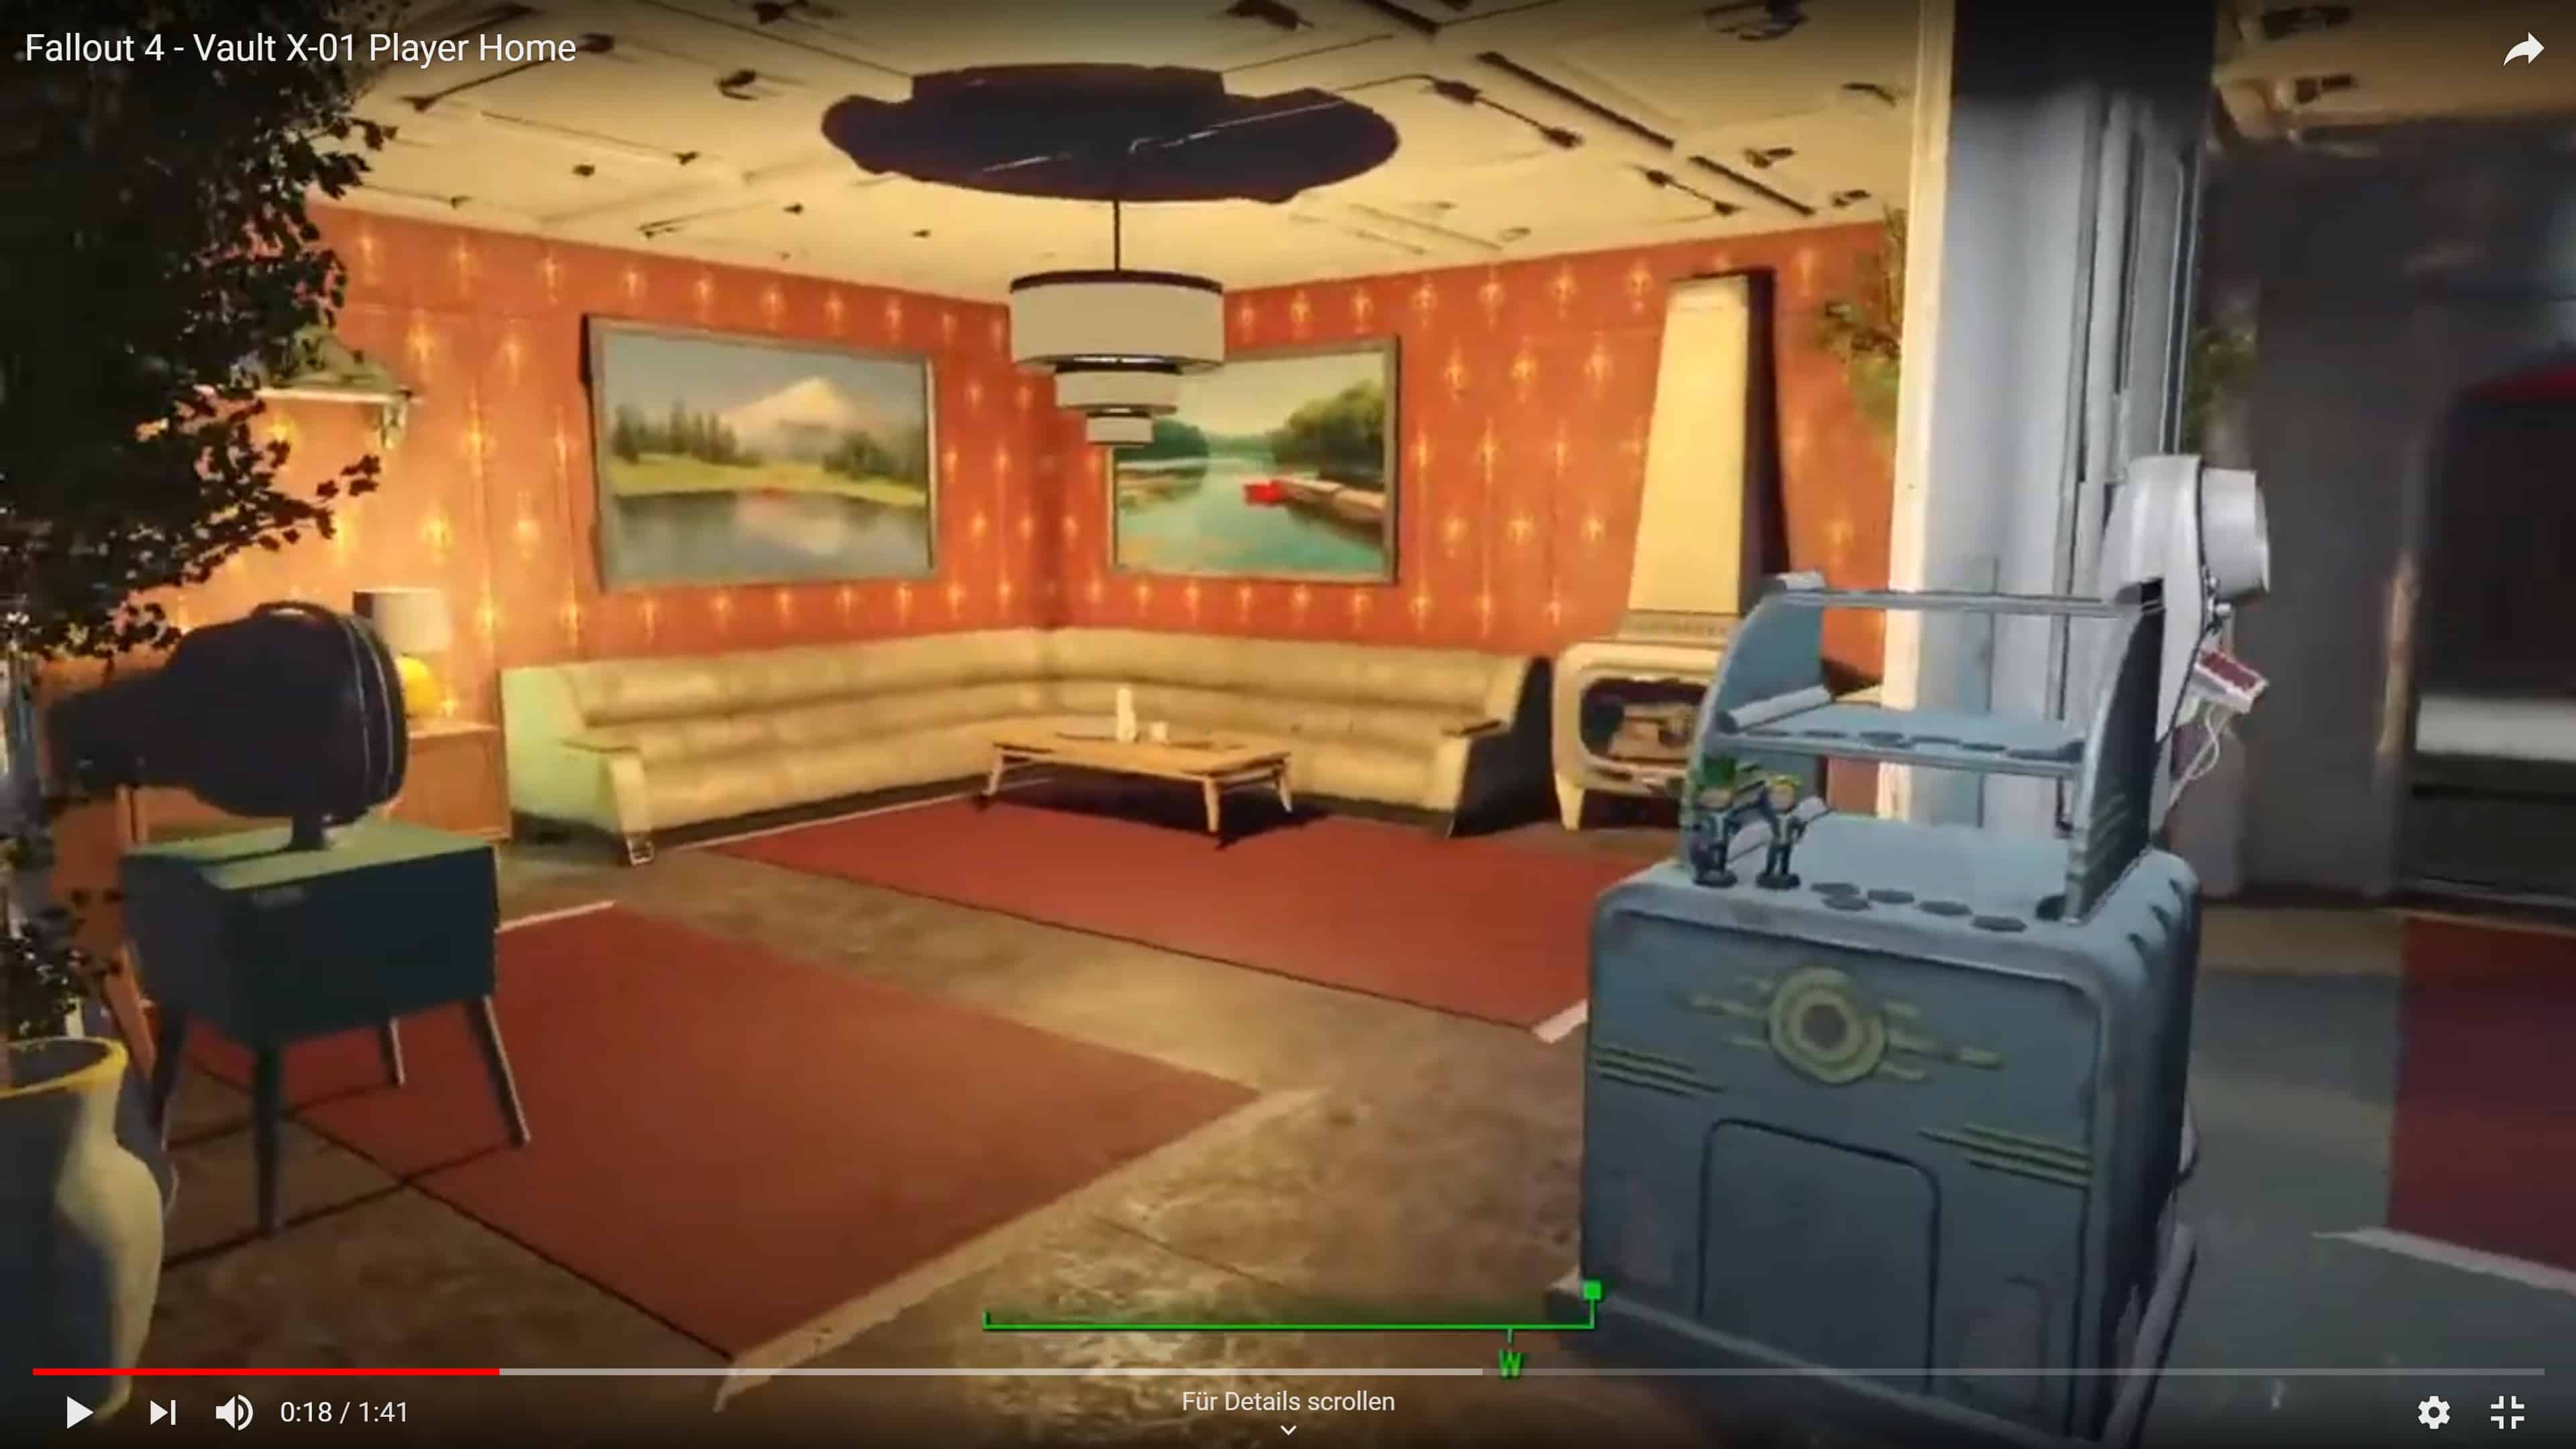  Best player home mods fallout 4